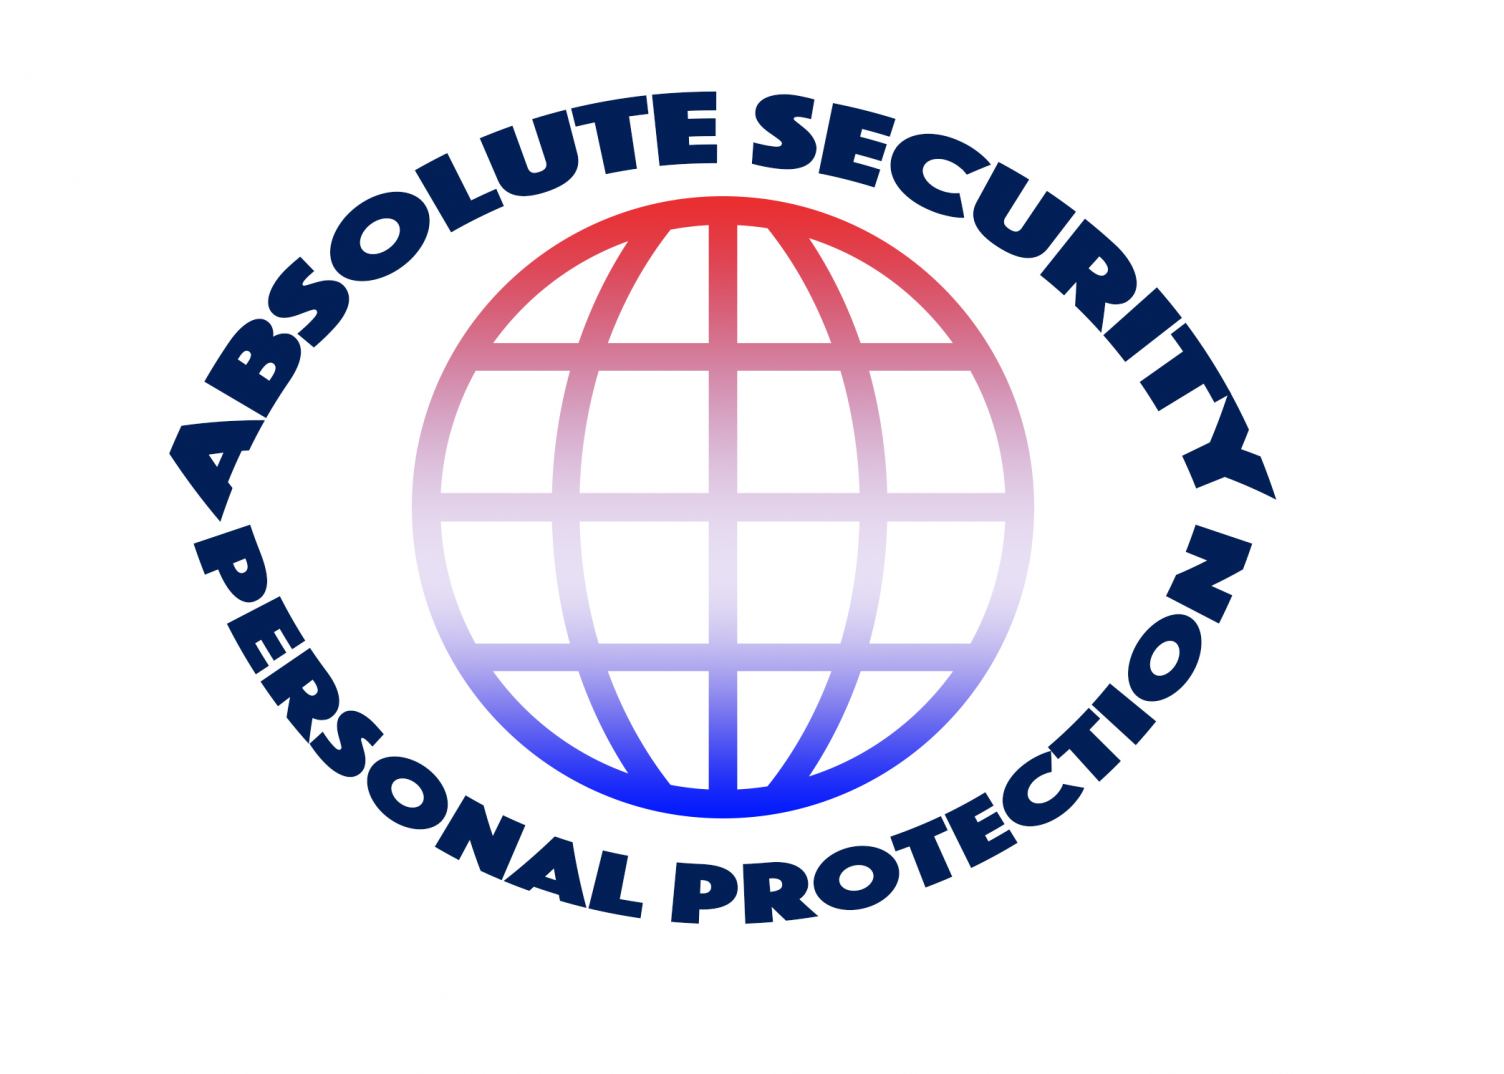 Absolute Security & Personal Protection Logo